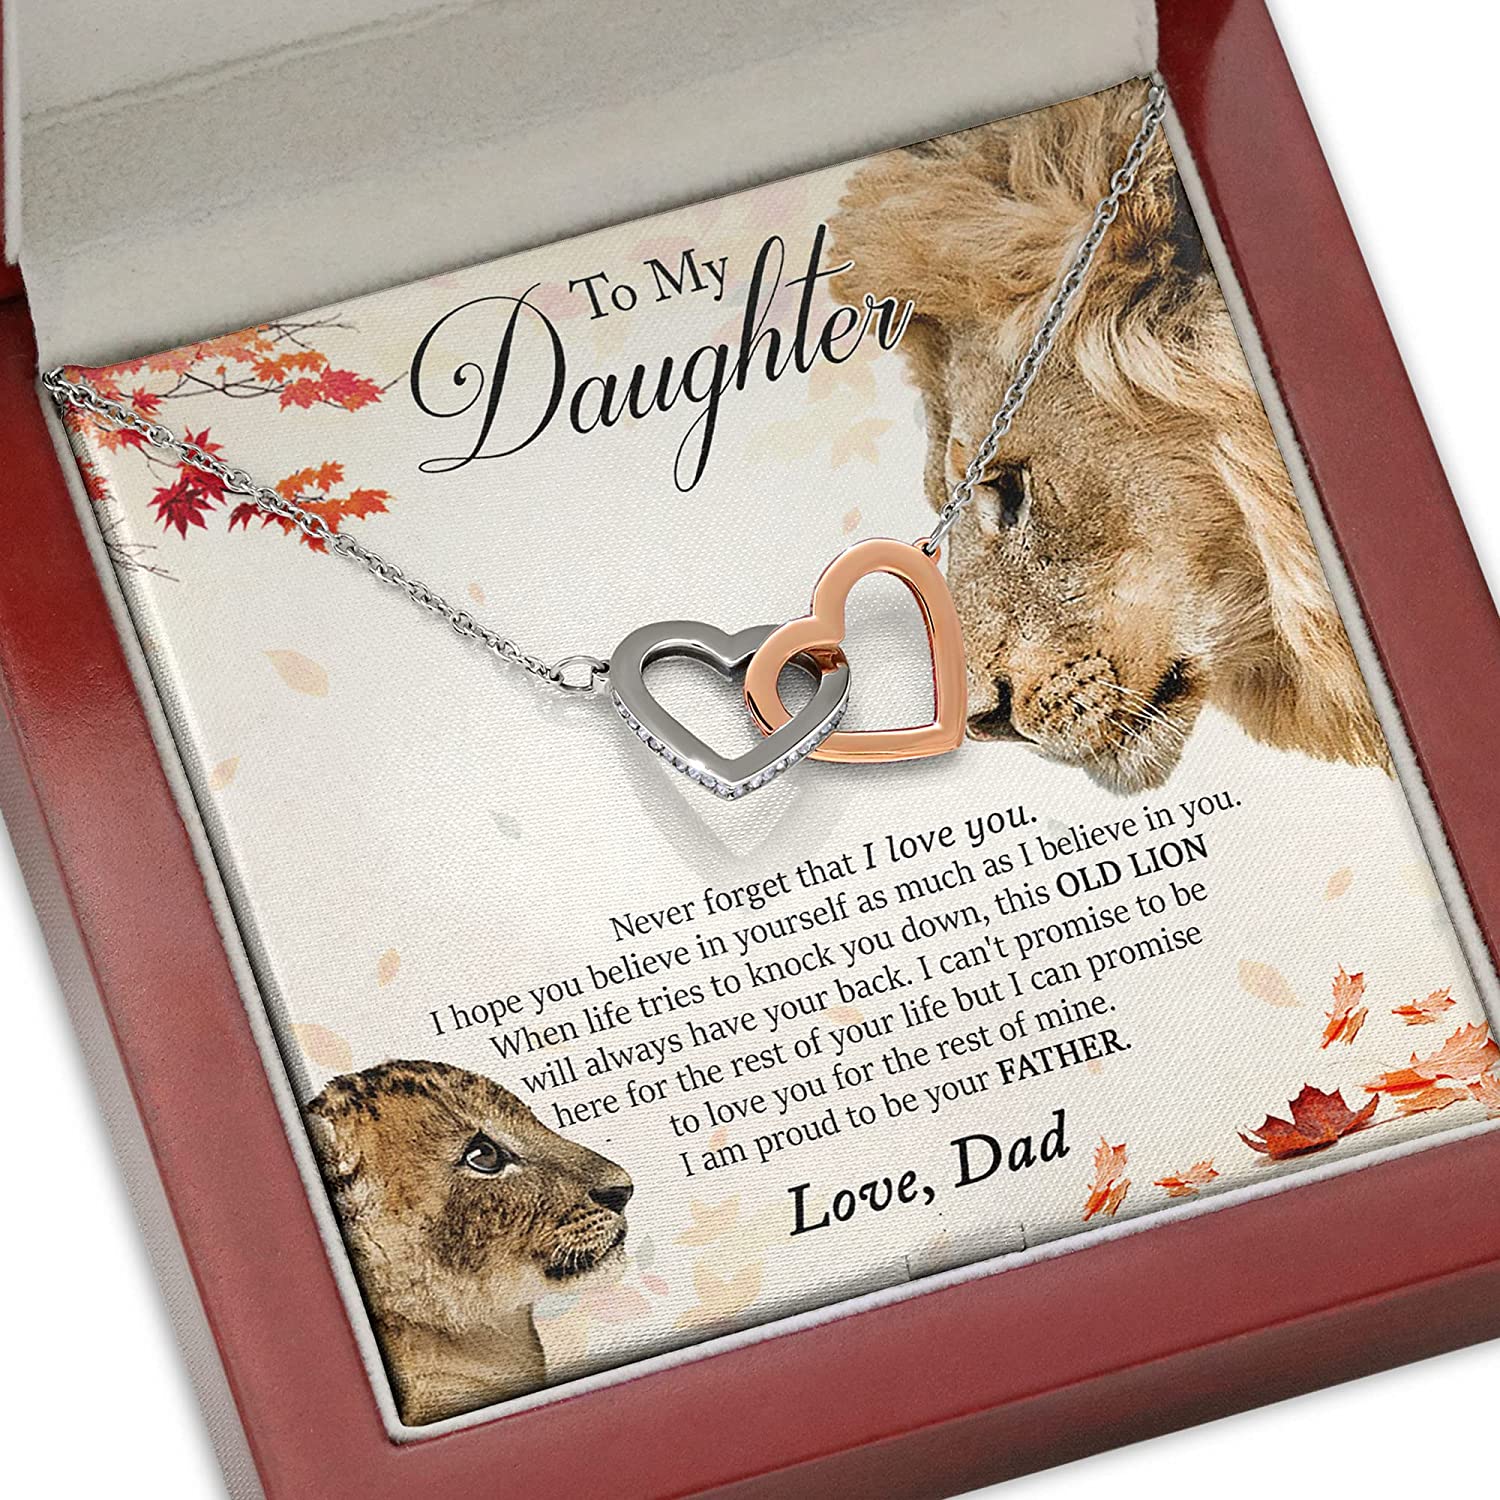 Gifts to My Daughter Necklace/ This Old Lion Will Always Have Your Back/ Daughter Necklace From Dad/ Father